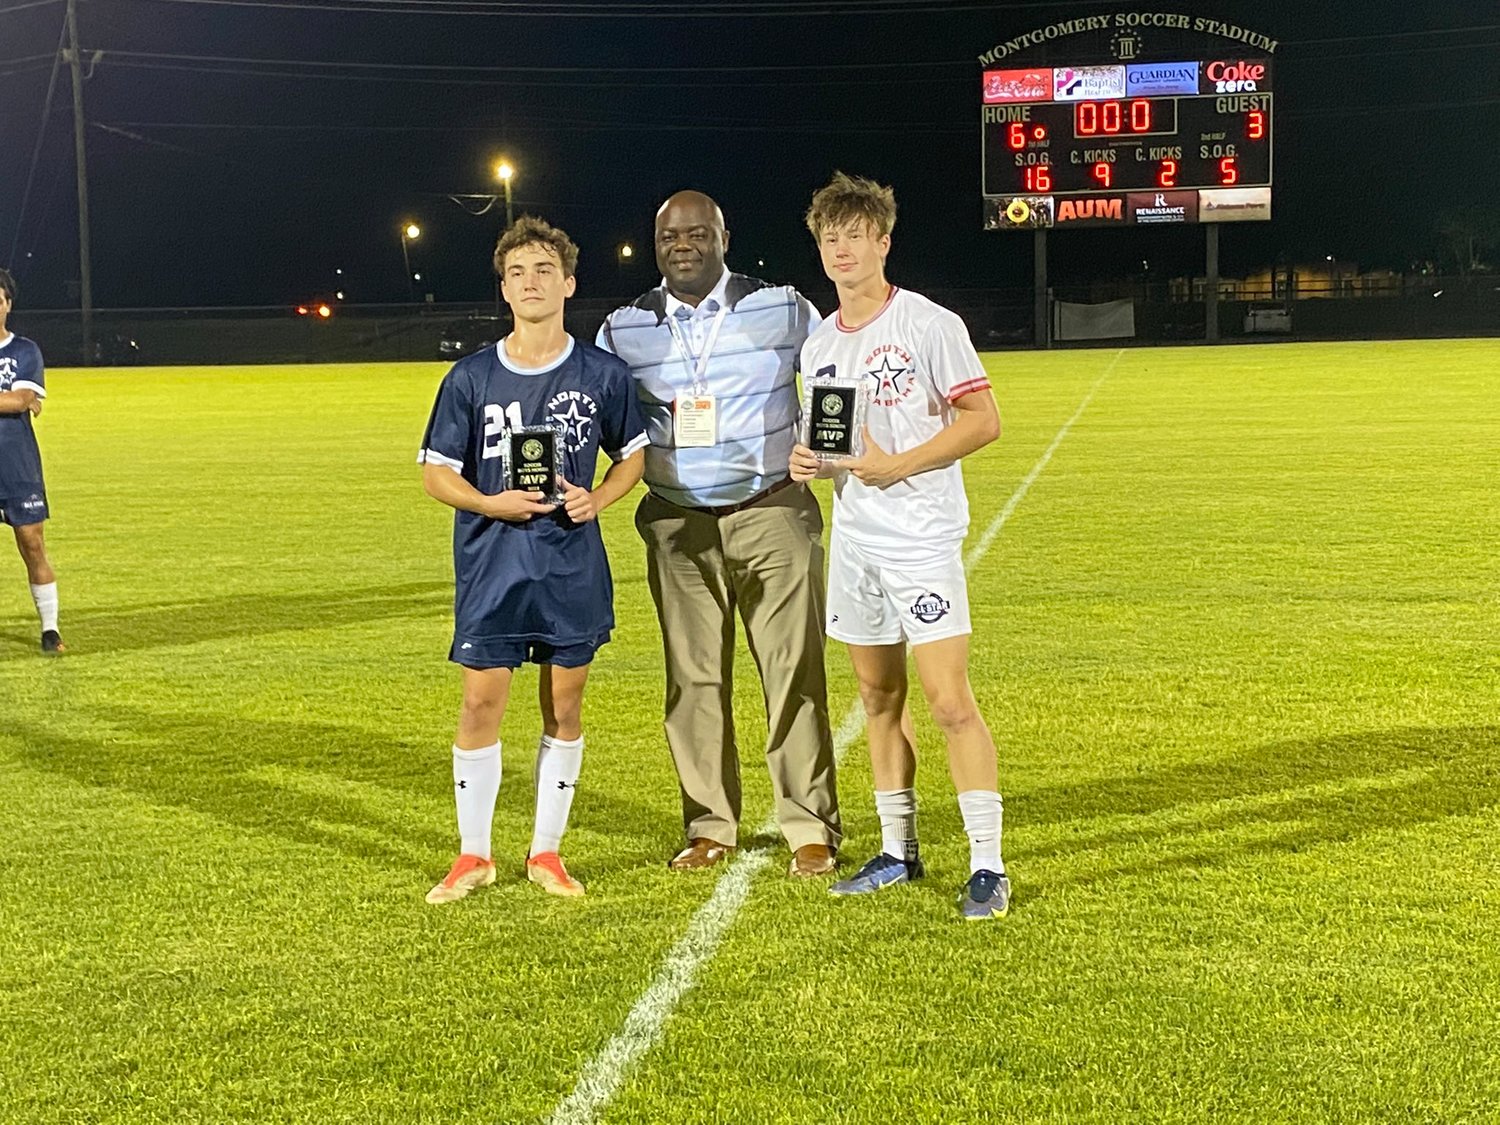 Spanish Fort’s Colin Spuler (right) was named the South MVP at the Alabama High School Athletic Association’s North-South All-Star Game in Montgomery last Wednesday, July 20.